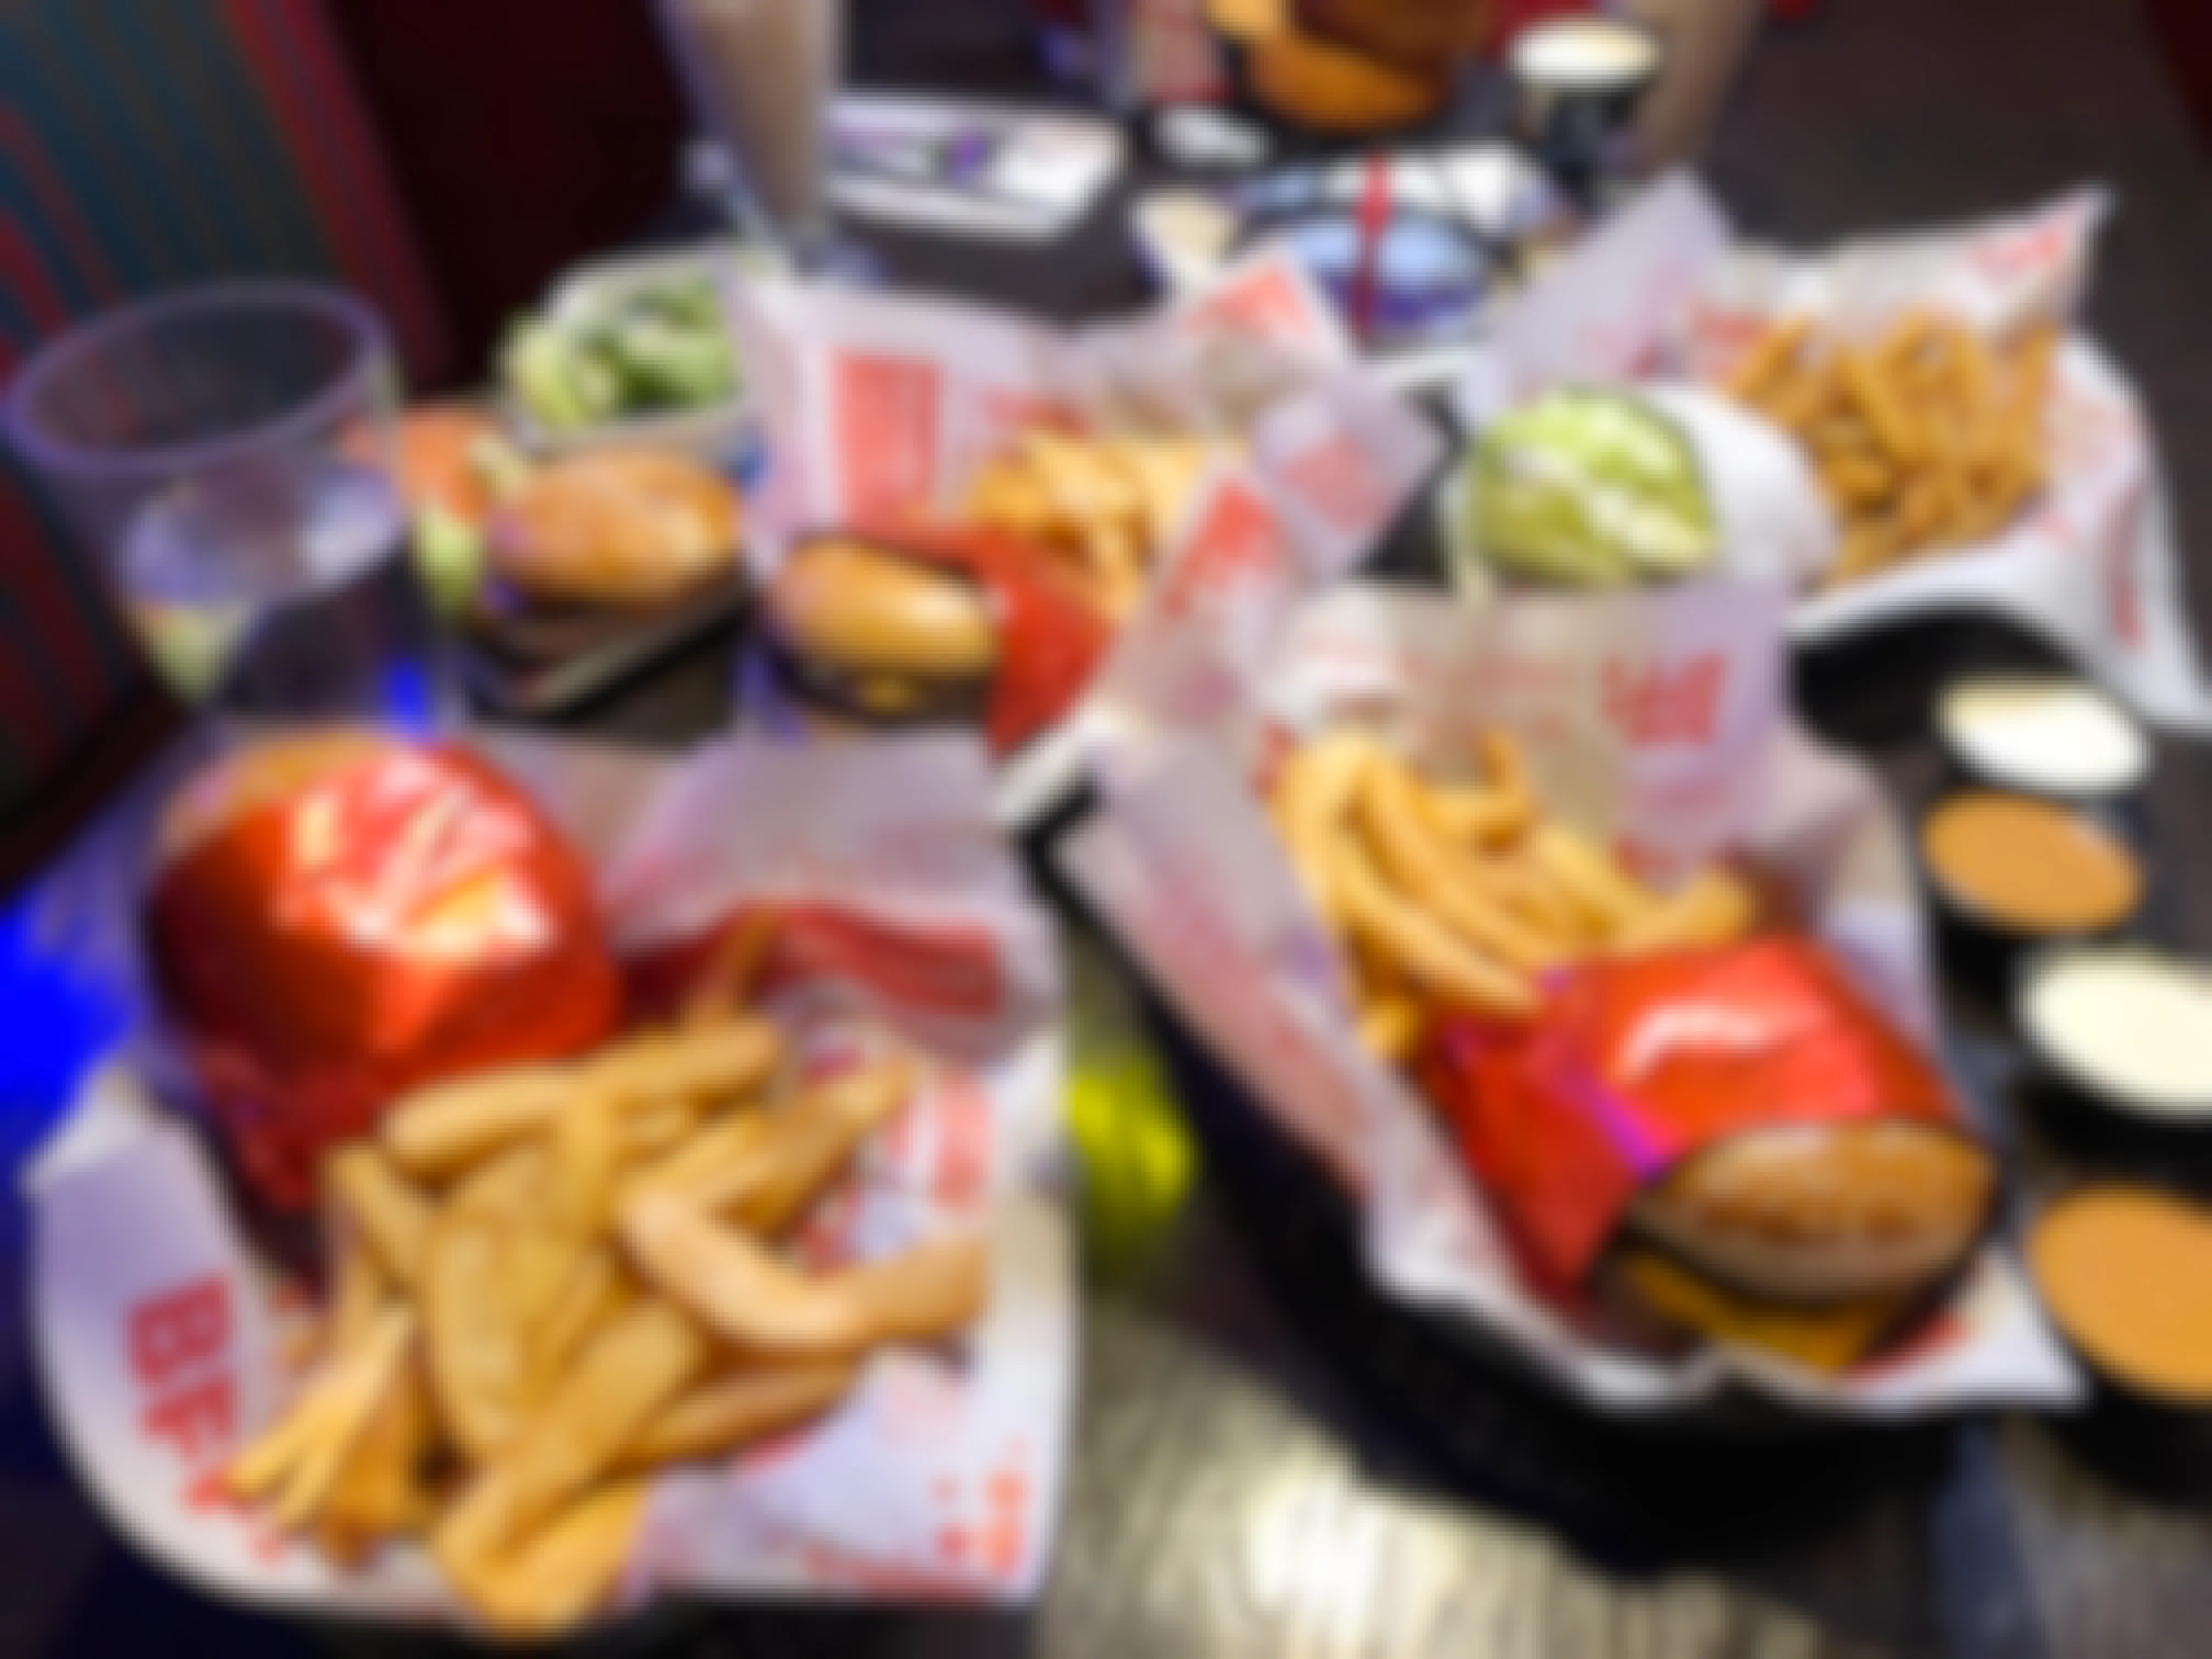 23 Ways to Be Red Robin Royalty While Spending Less